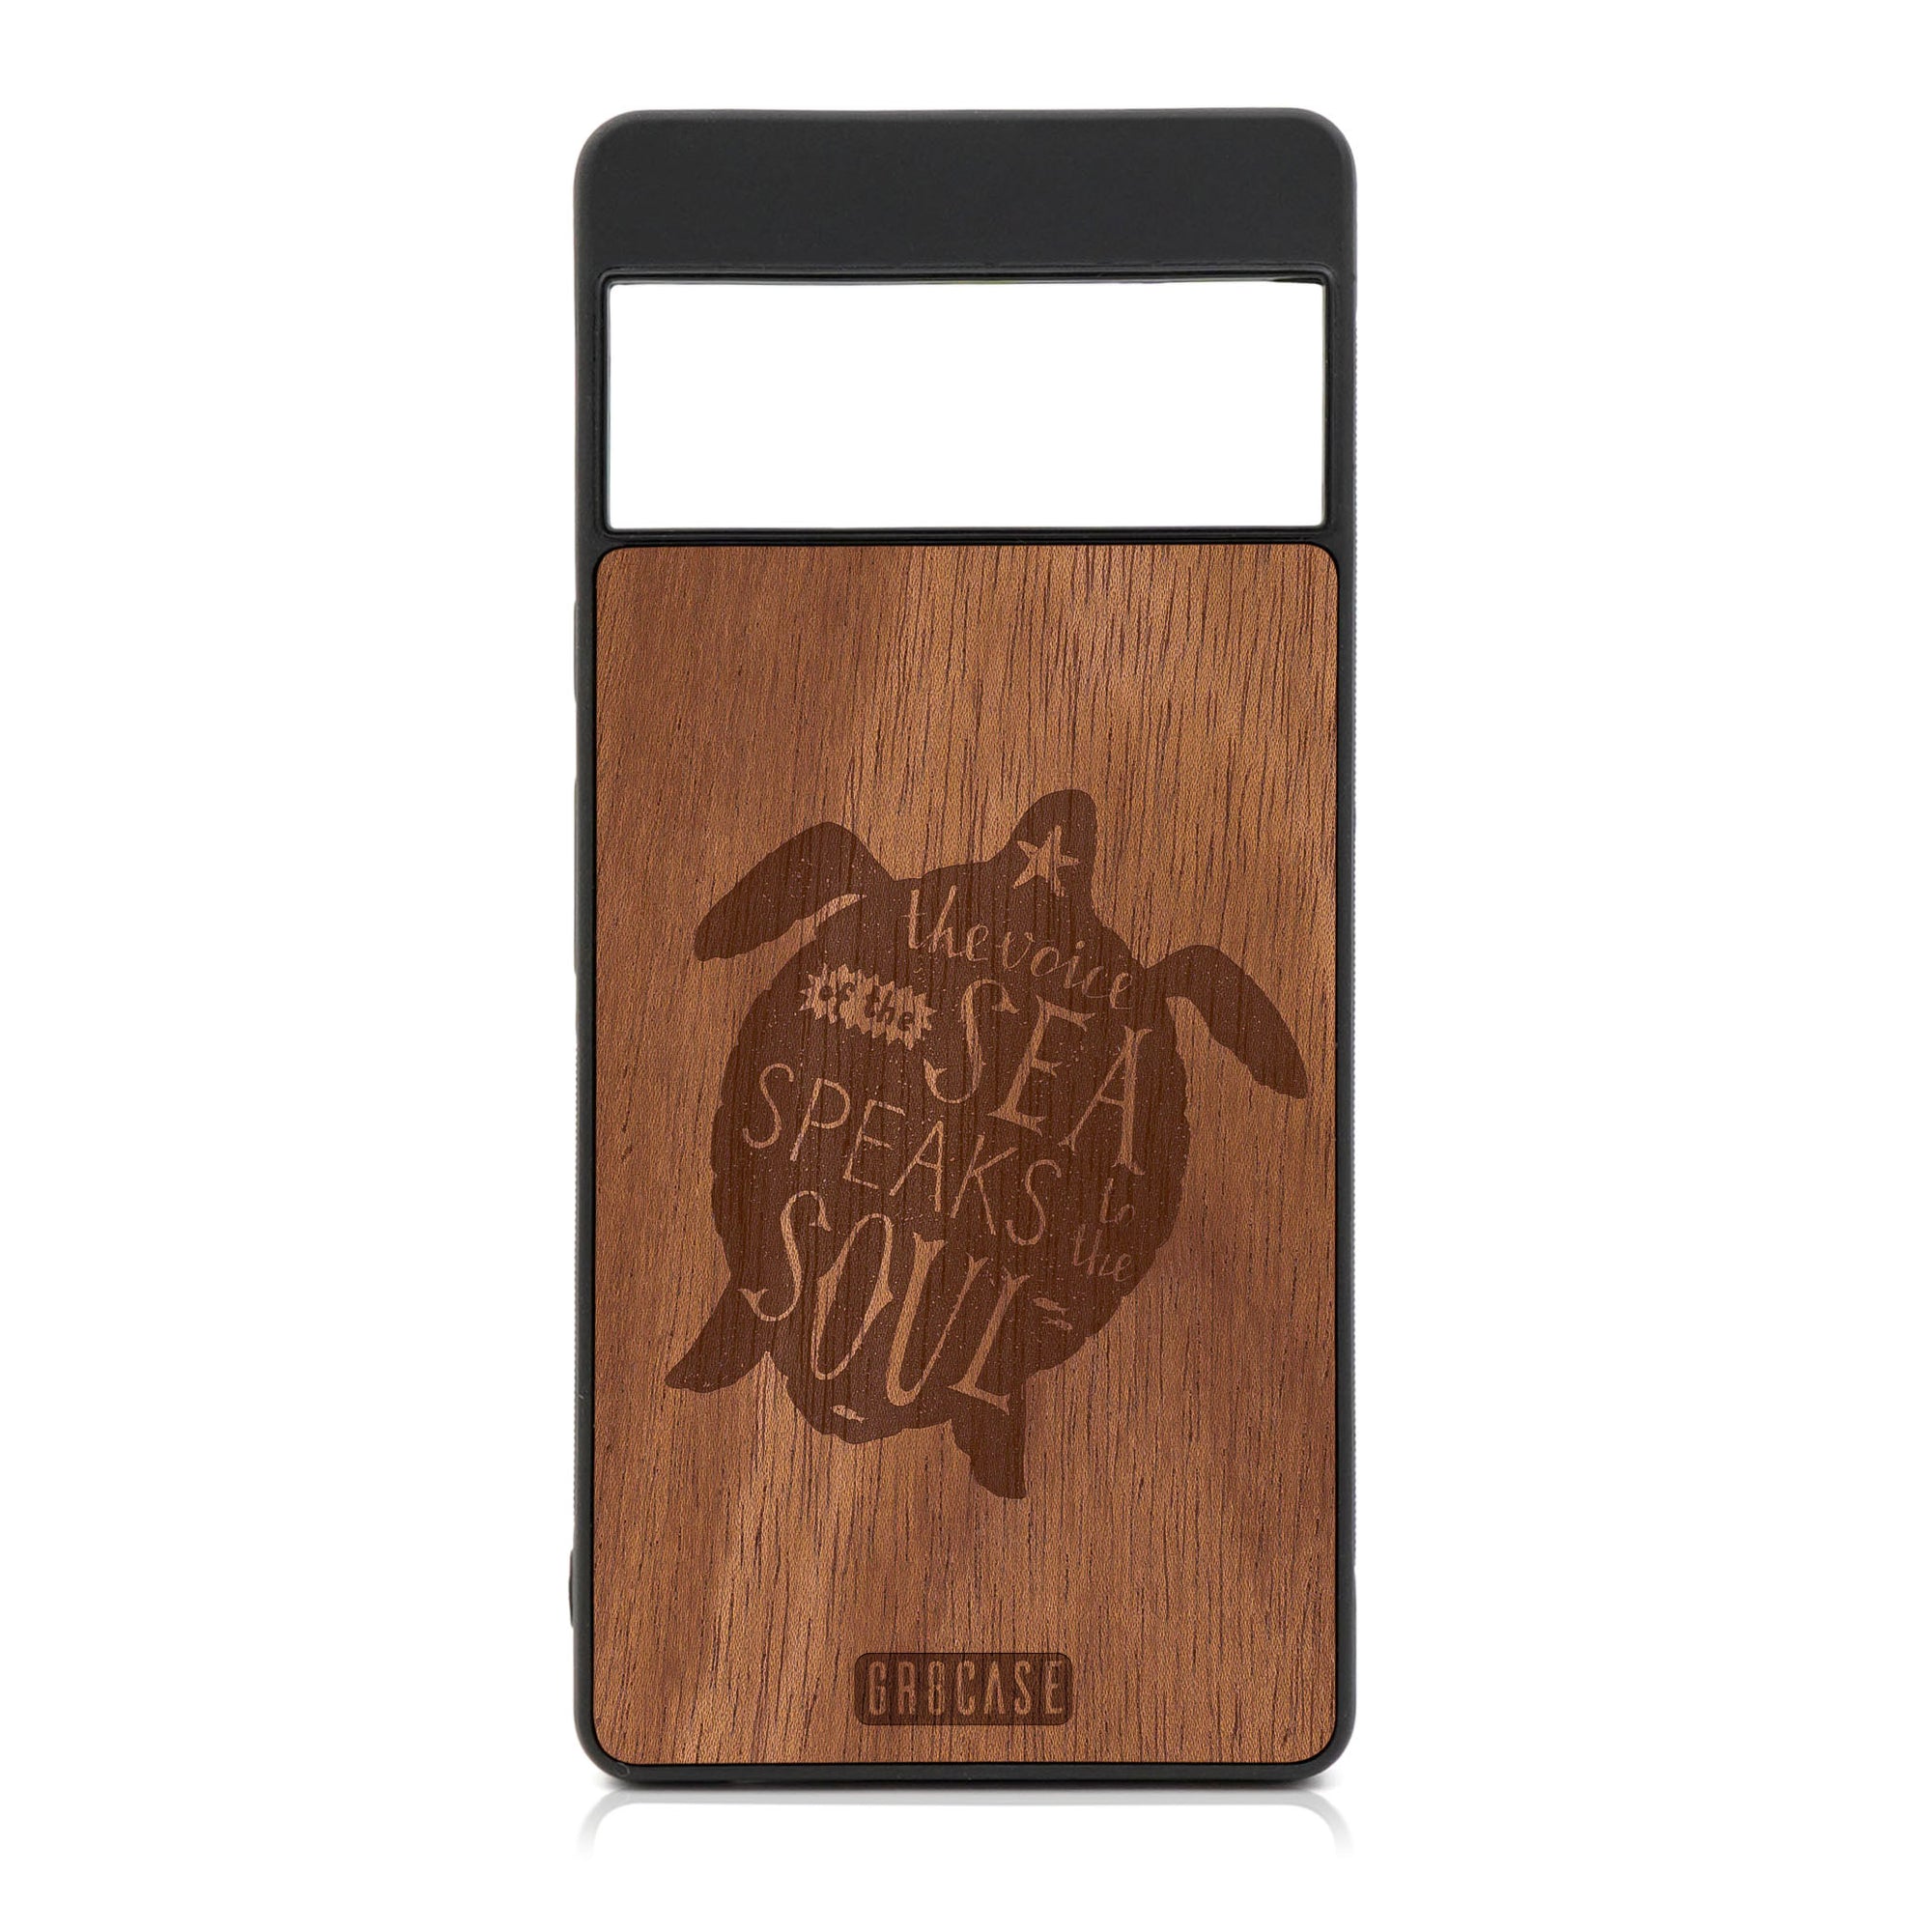 The Voice Of The Sea Speaks To The Soul (Turtle) Design Wood Case For Google Pixel 6